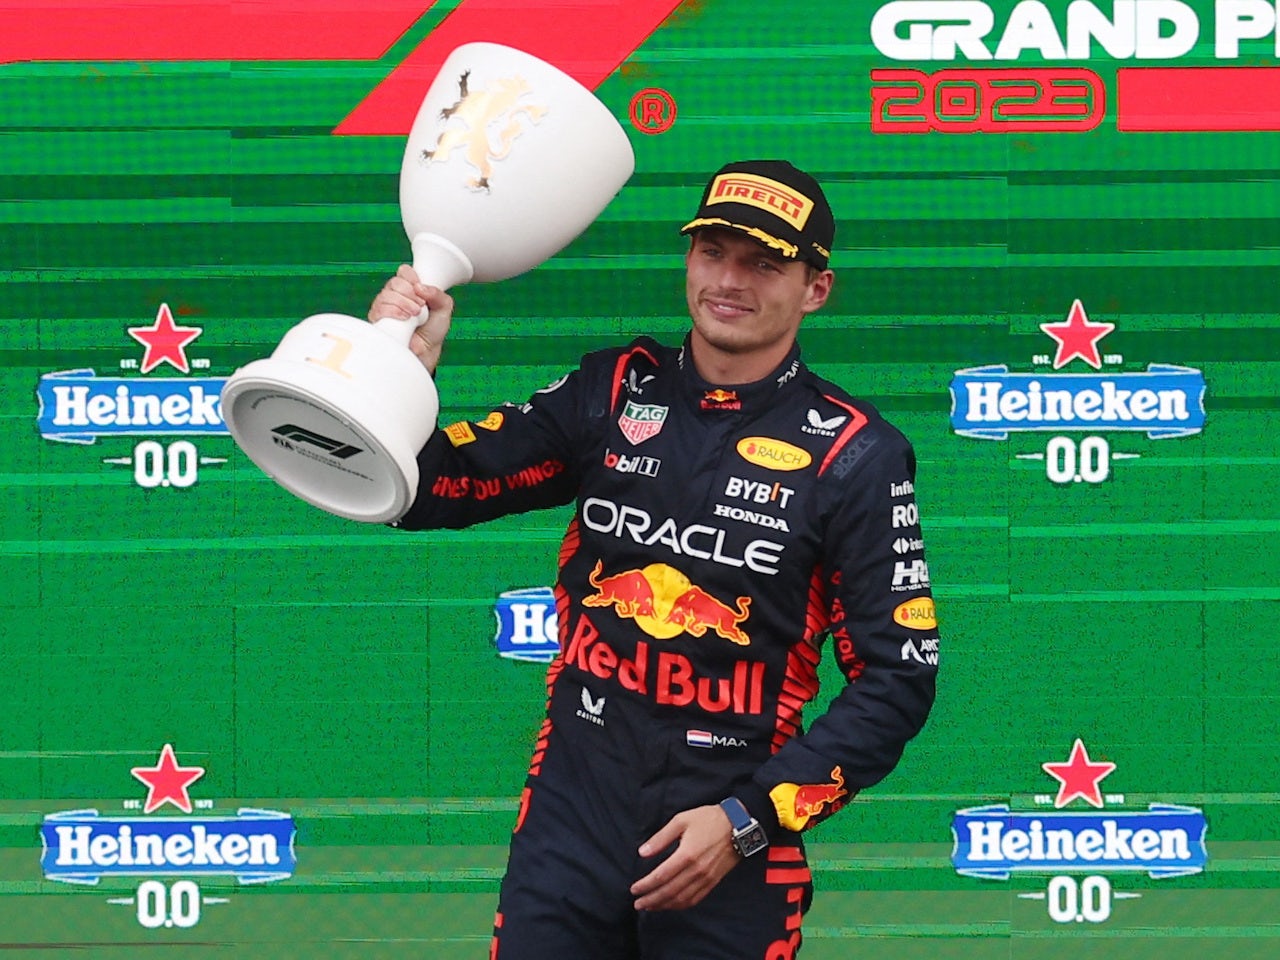 Max Verstappen claims record-equalling victory at Dutch Grand Prix